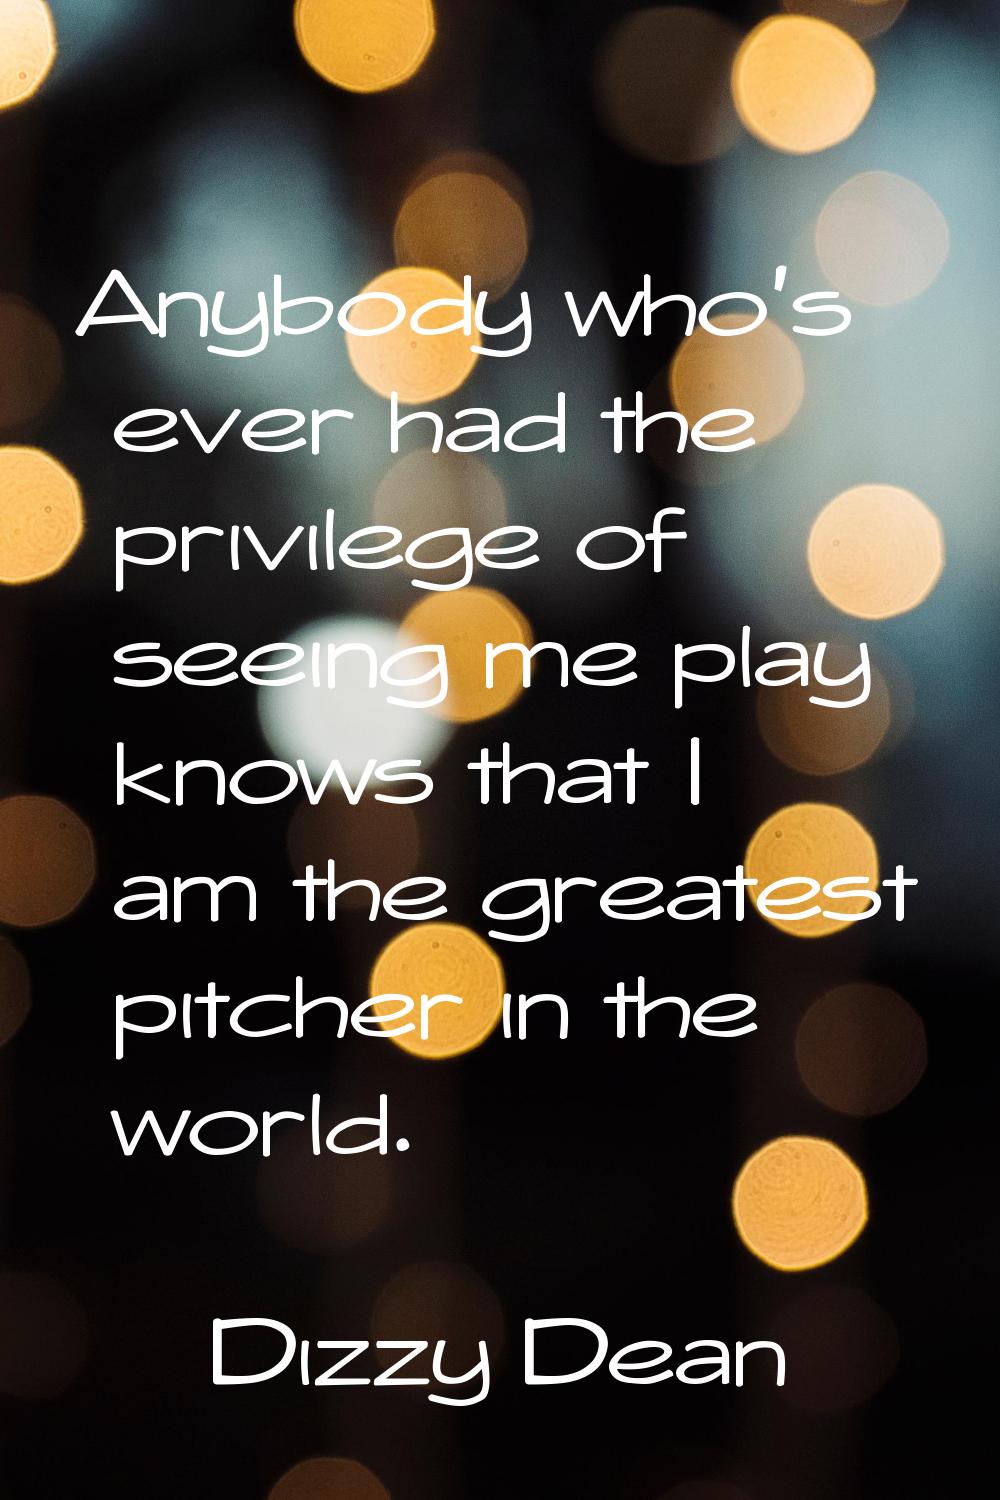 Anybody who's ever had the privilege of seeing me play knows that I am the greatest pitcher in the 